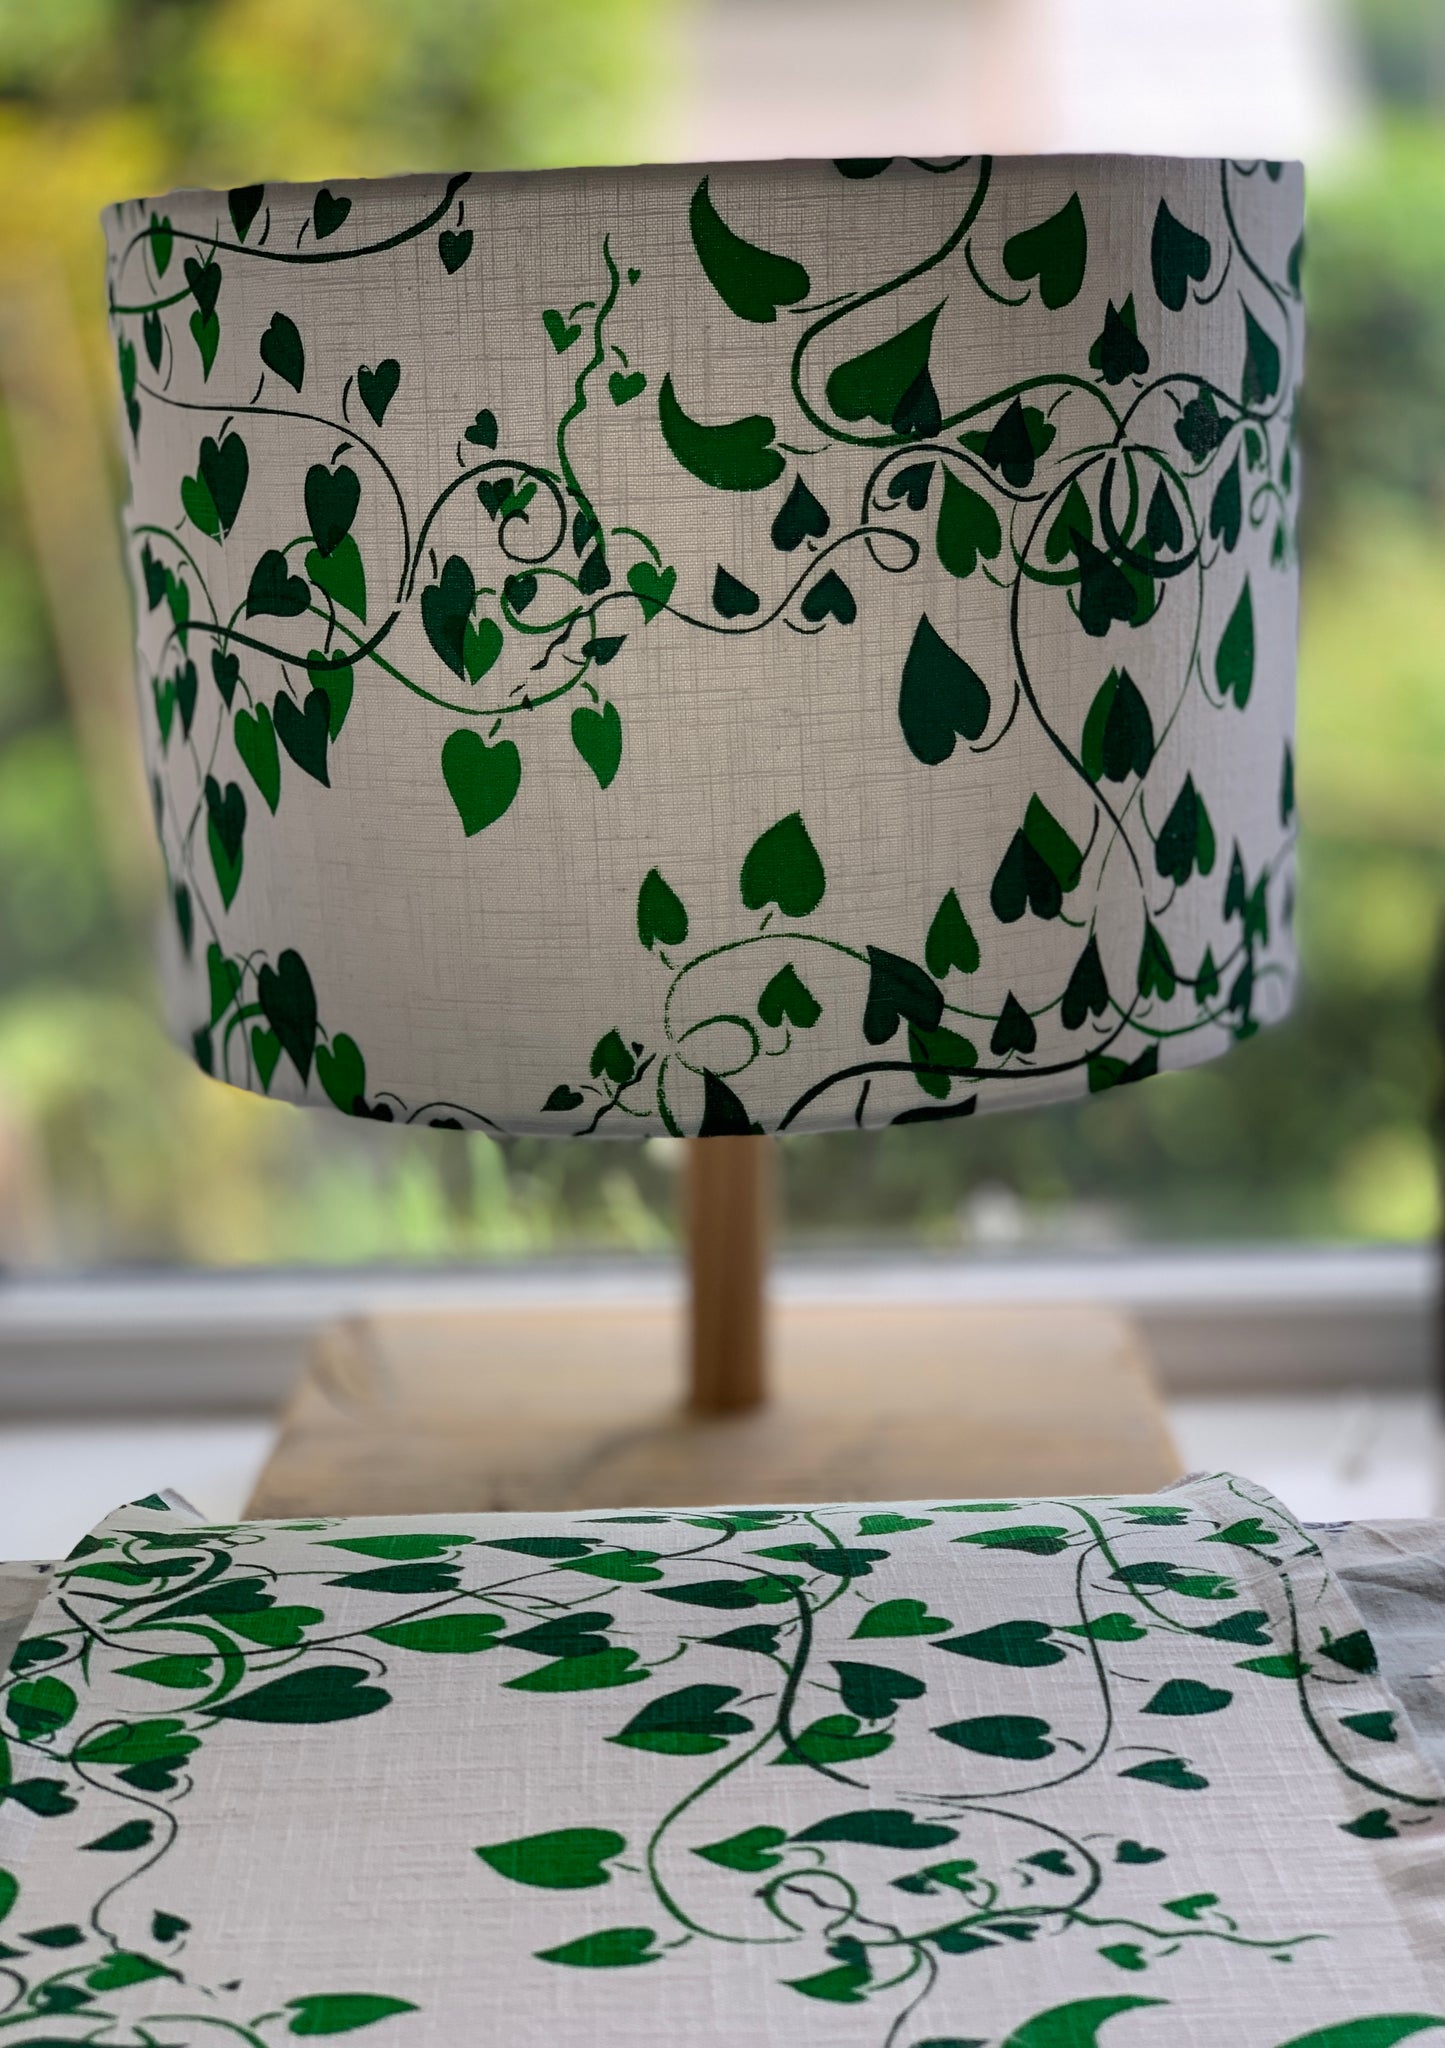 Table lampshade with a white linen background and two shades of green convolvulus vines running over it.